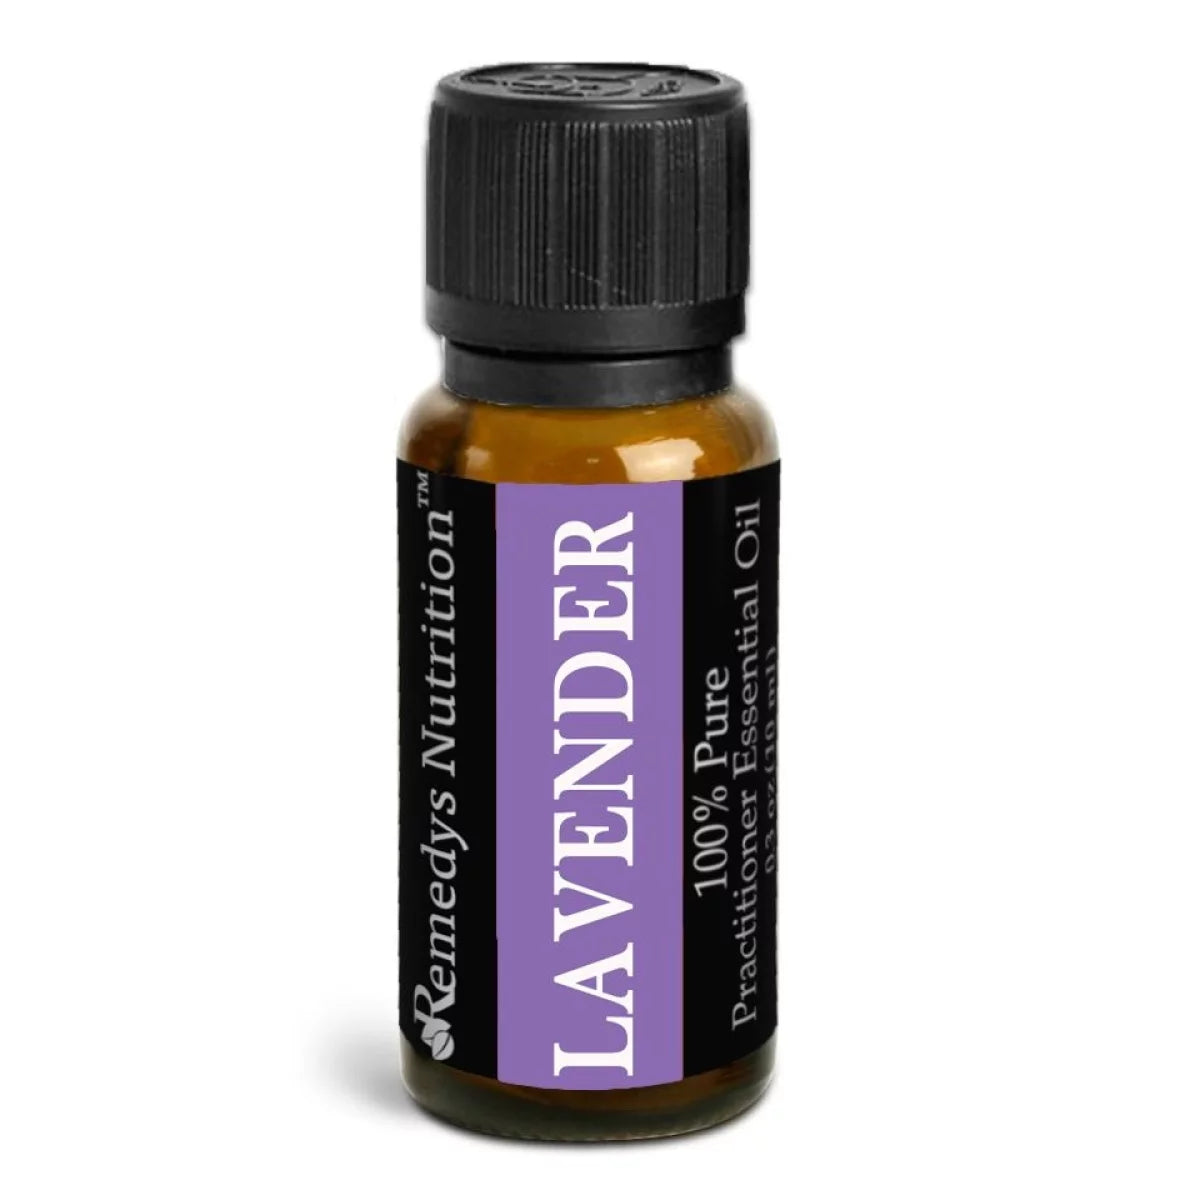 Image of Remedy's Nutrition® Lavender Essential Oil Herbal Supplement front bottle.